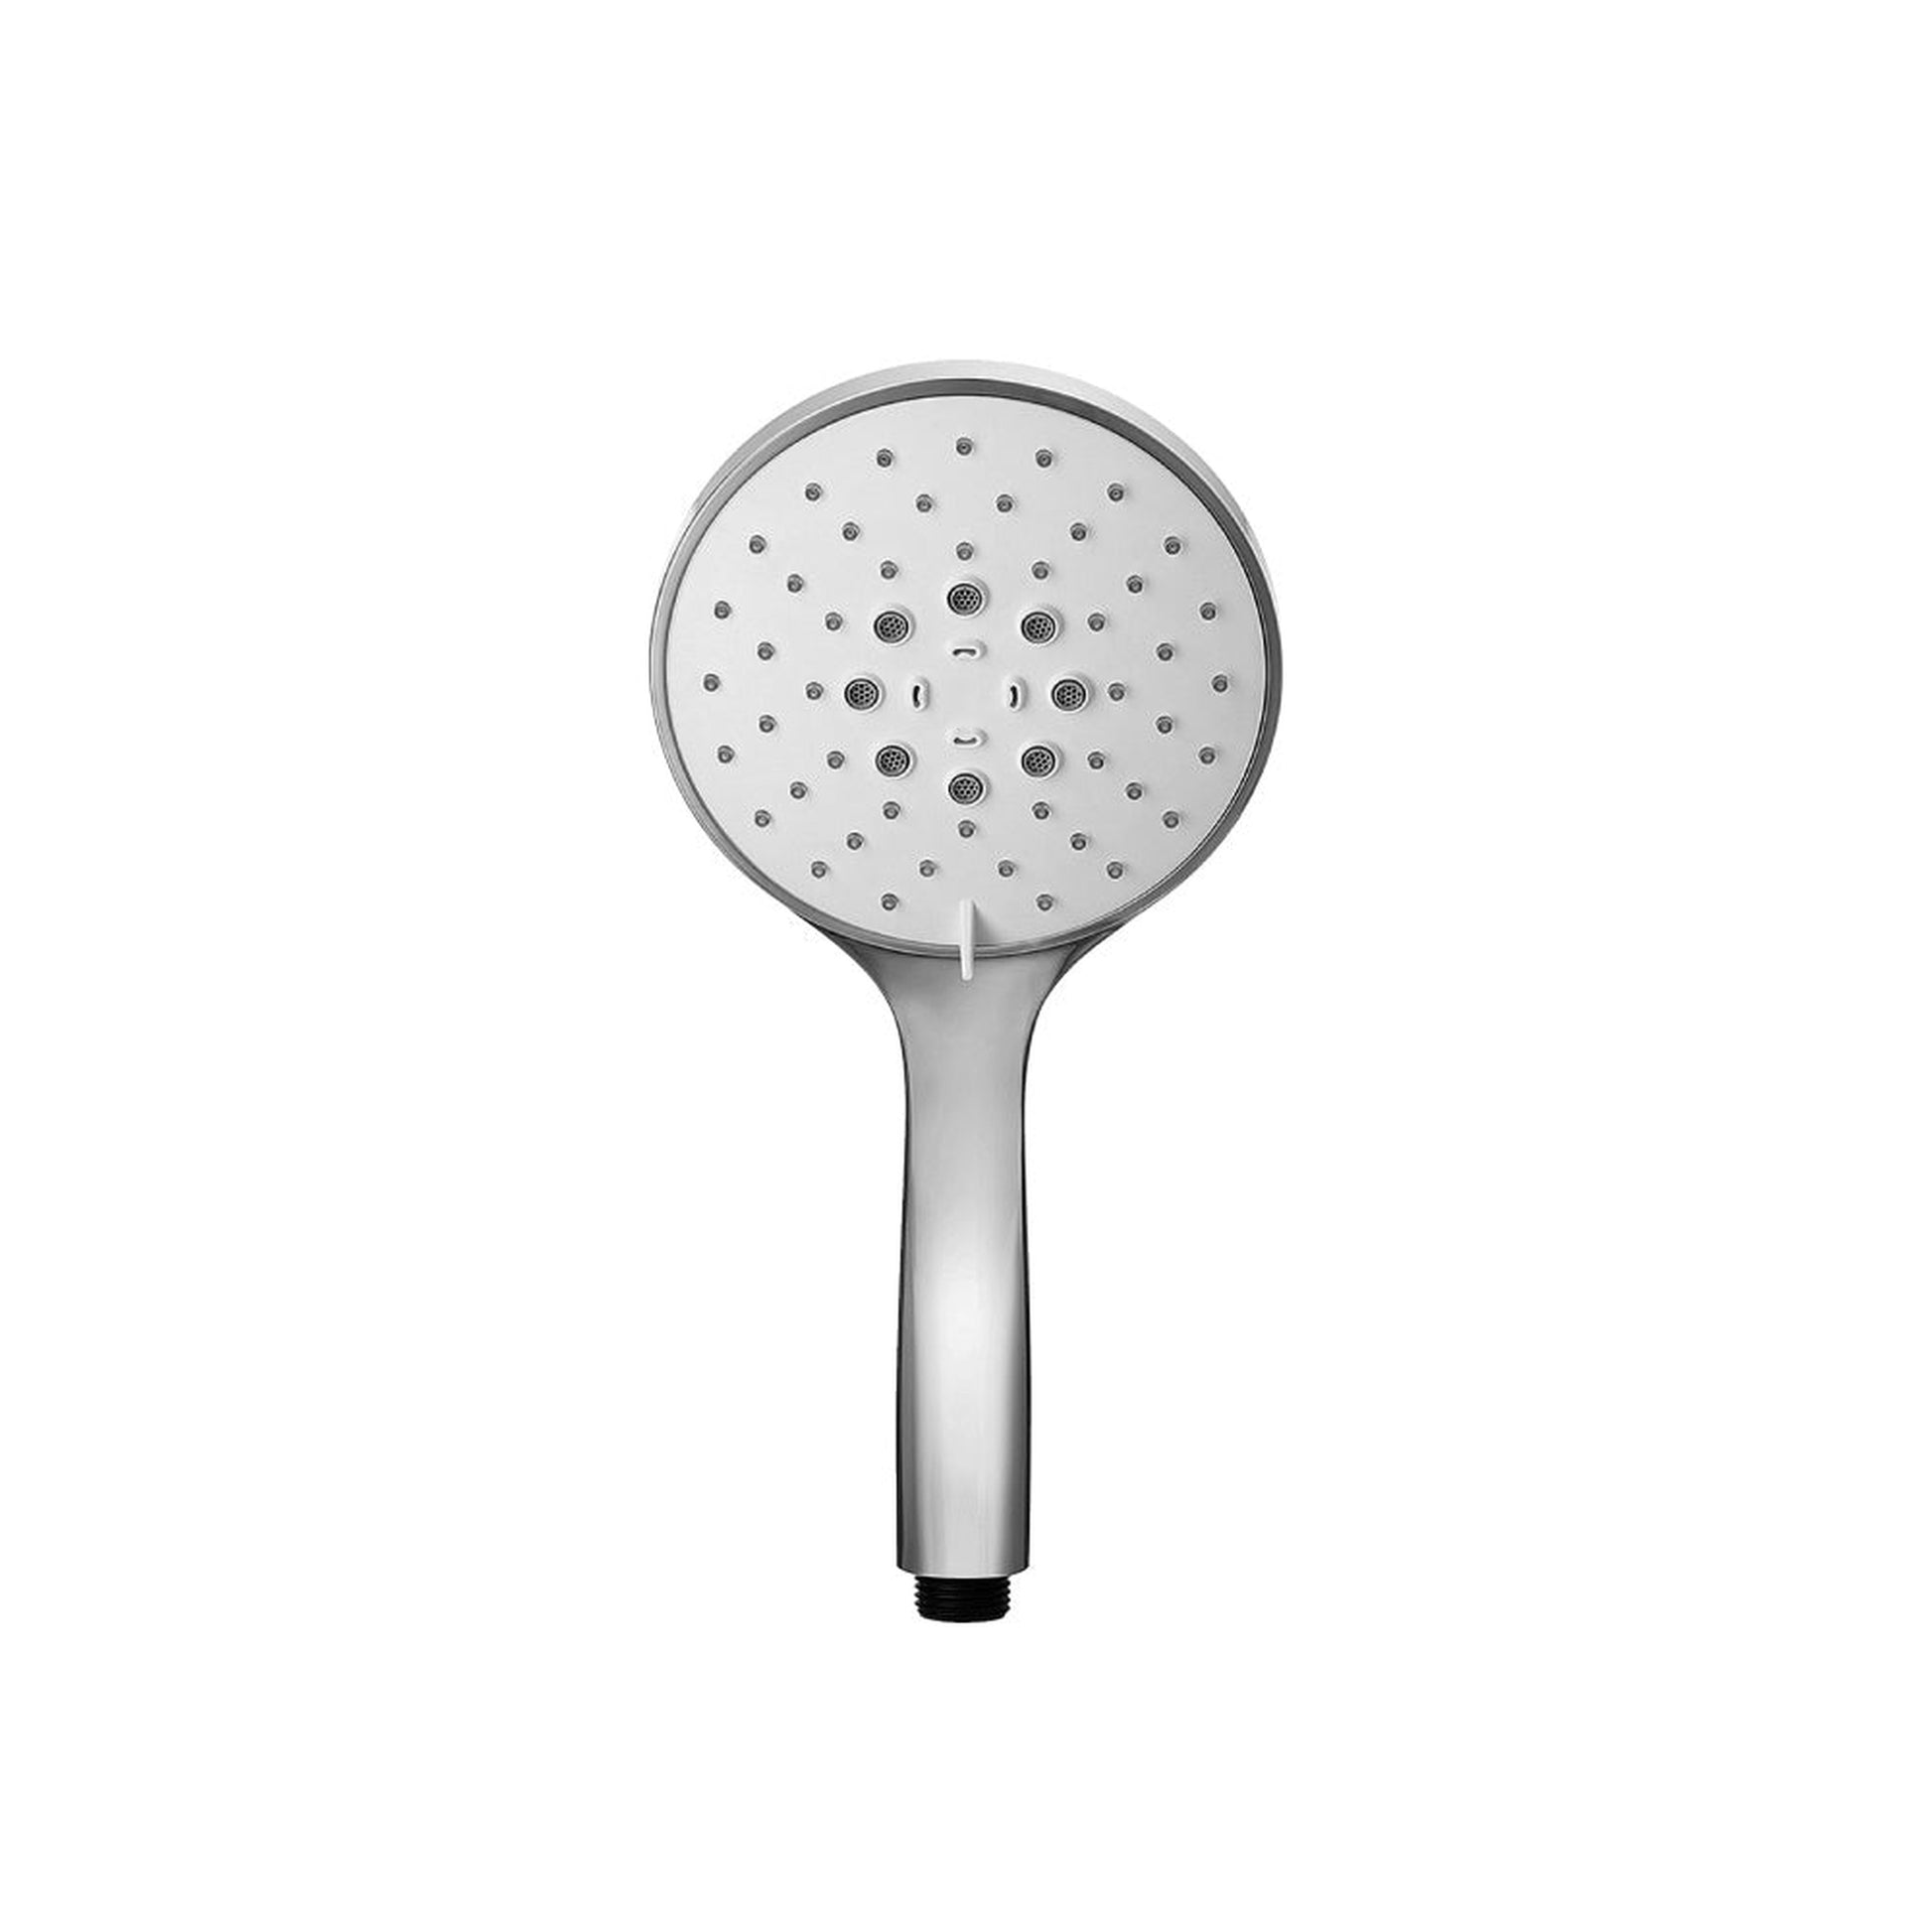 Isenberg Universal Fixtures 3-Function 130MM ABS Hand Held Shower Head in Chrome